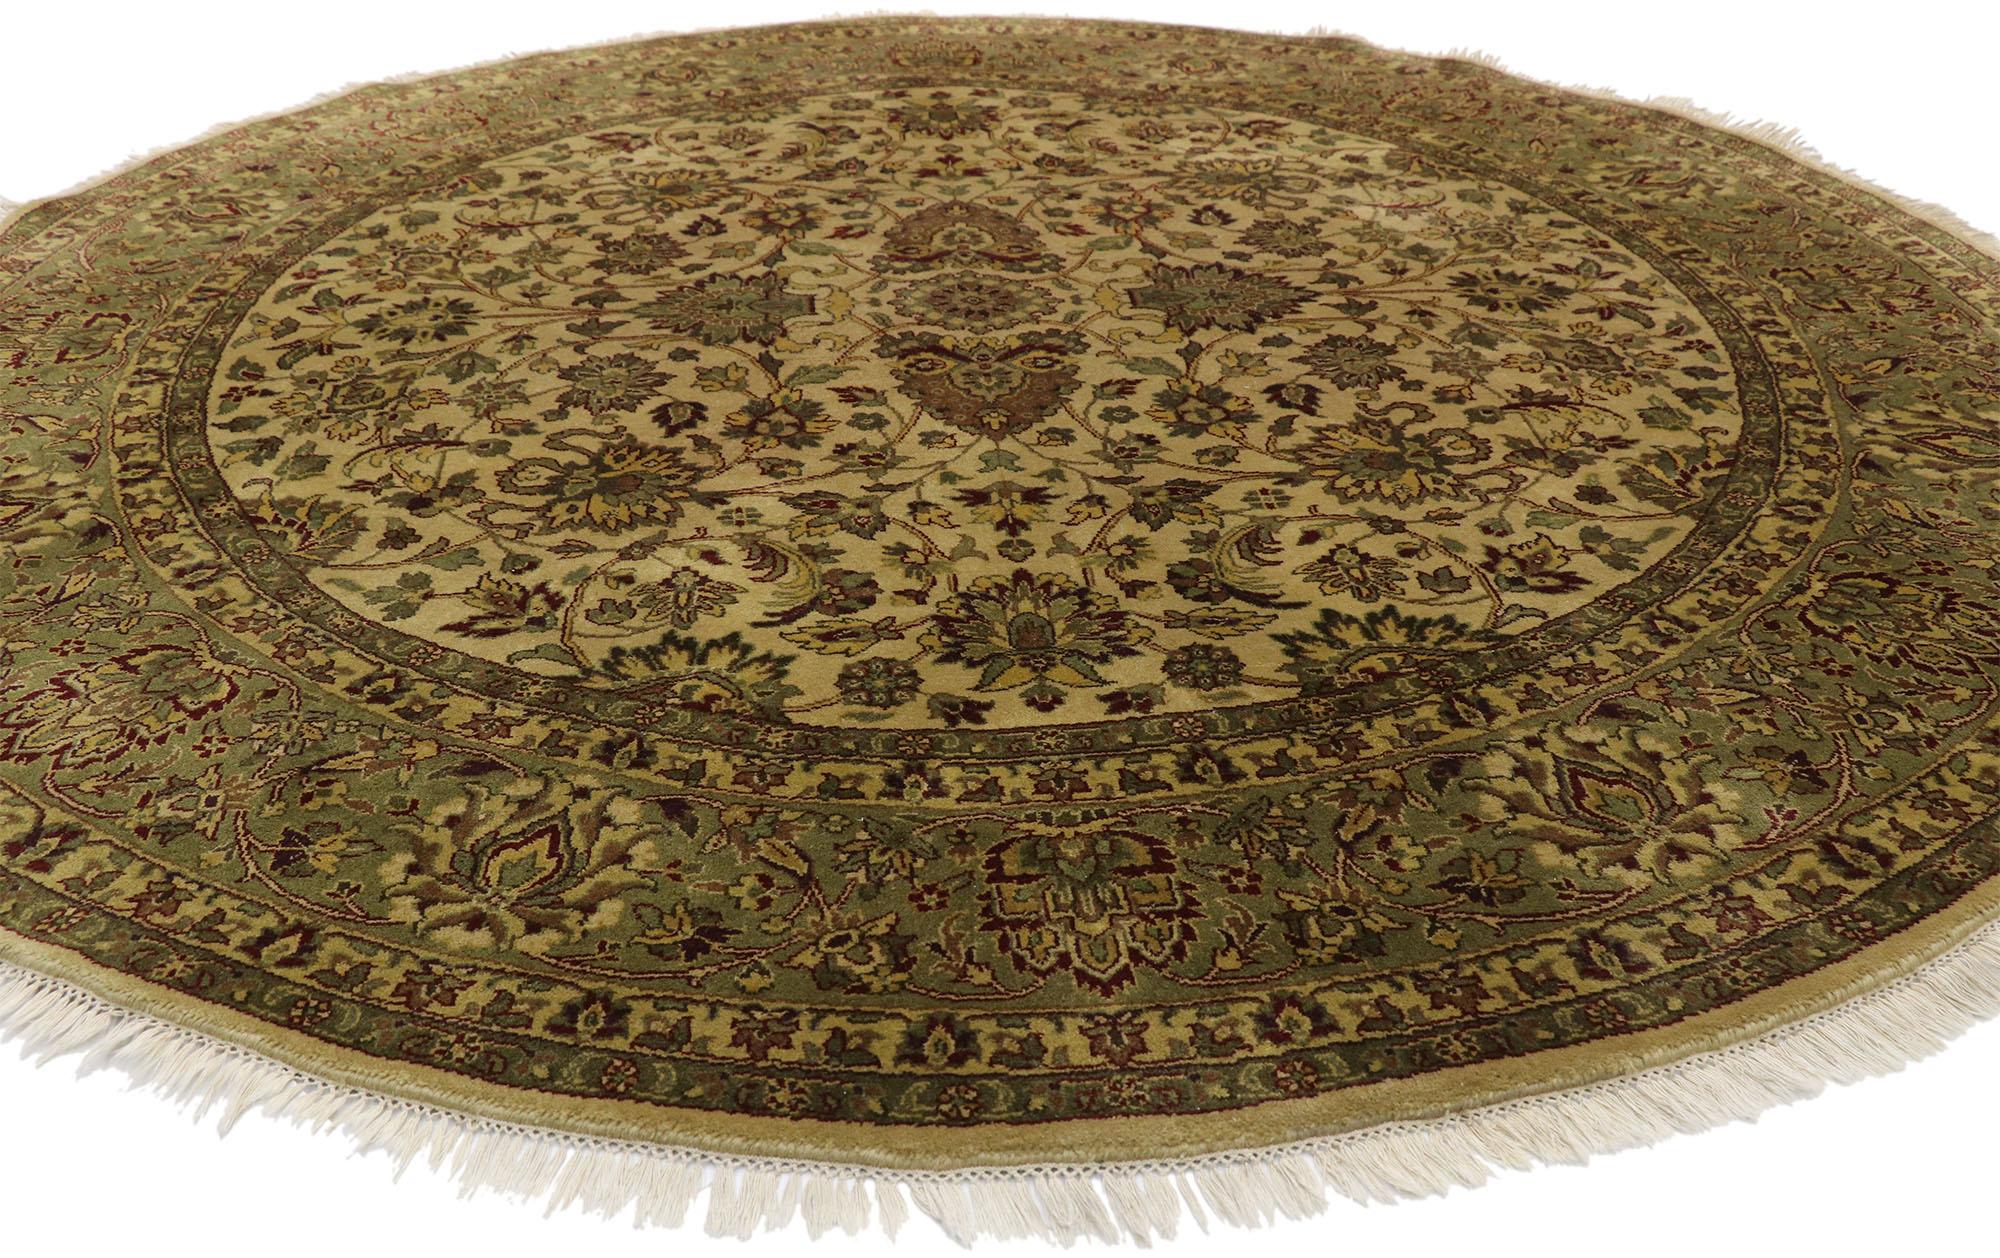 Shaker Vintage Indian Round Area Rug, Circular Rug with Traditional Style